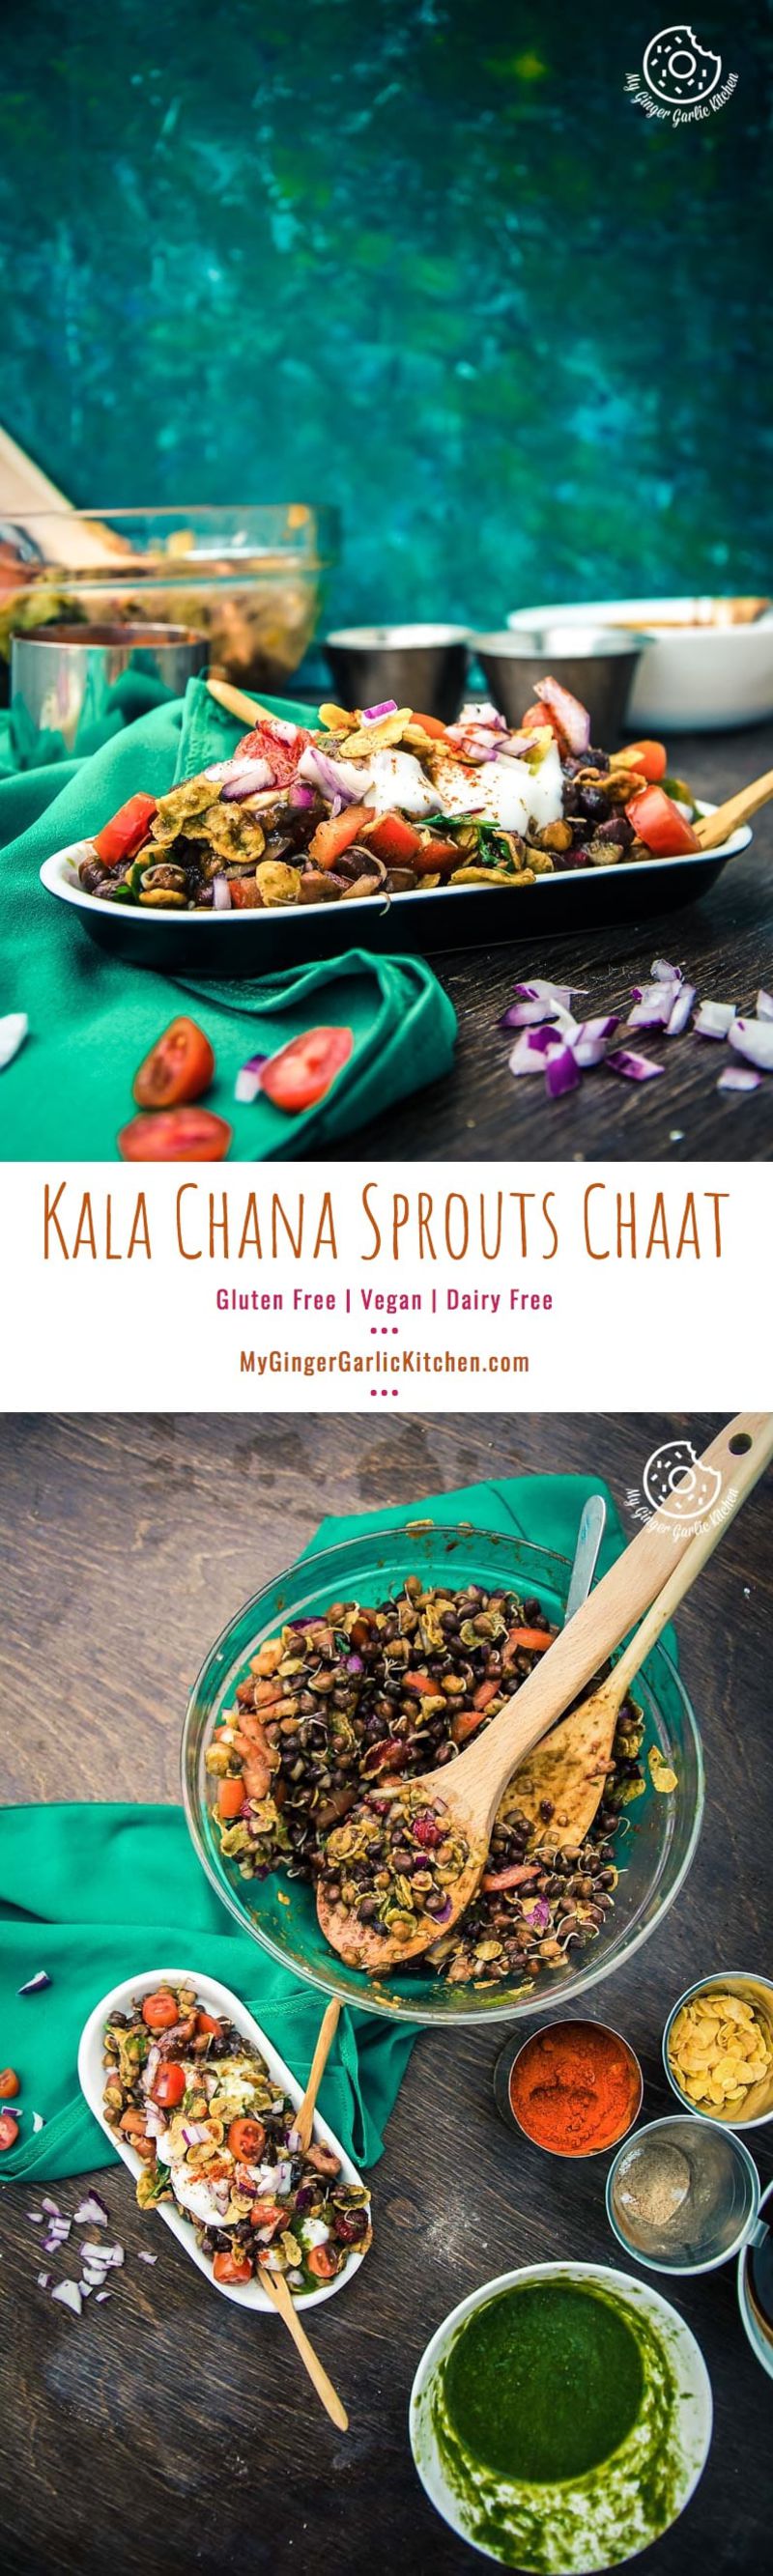 there are two plates of kala chana sprouts chaat on a table with a green cloth